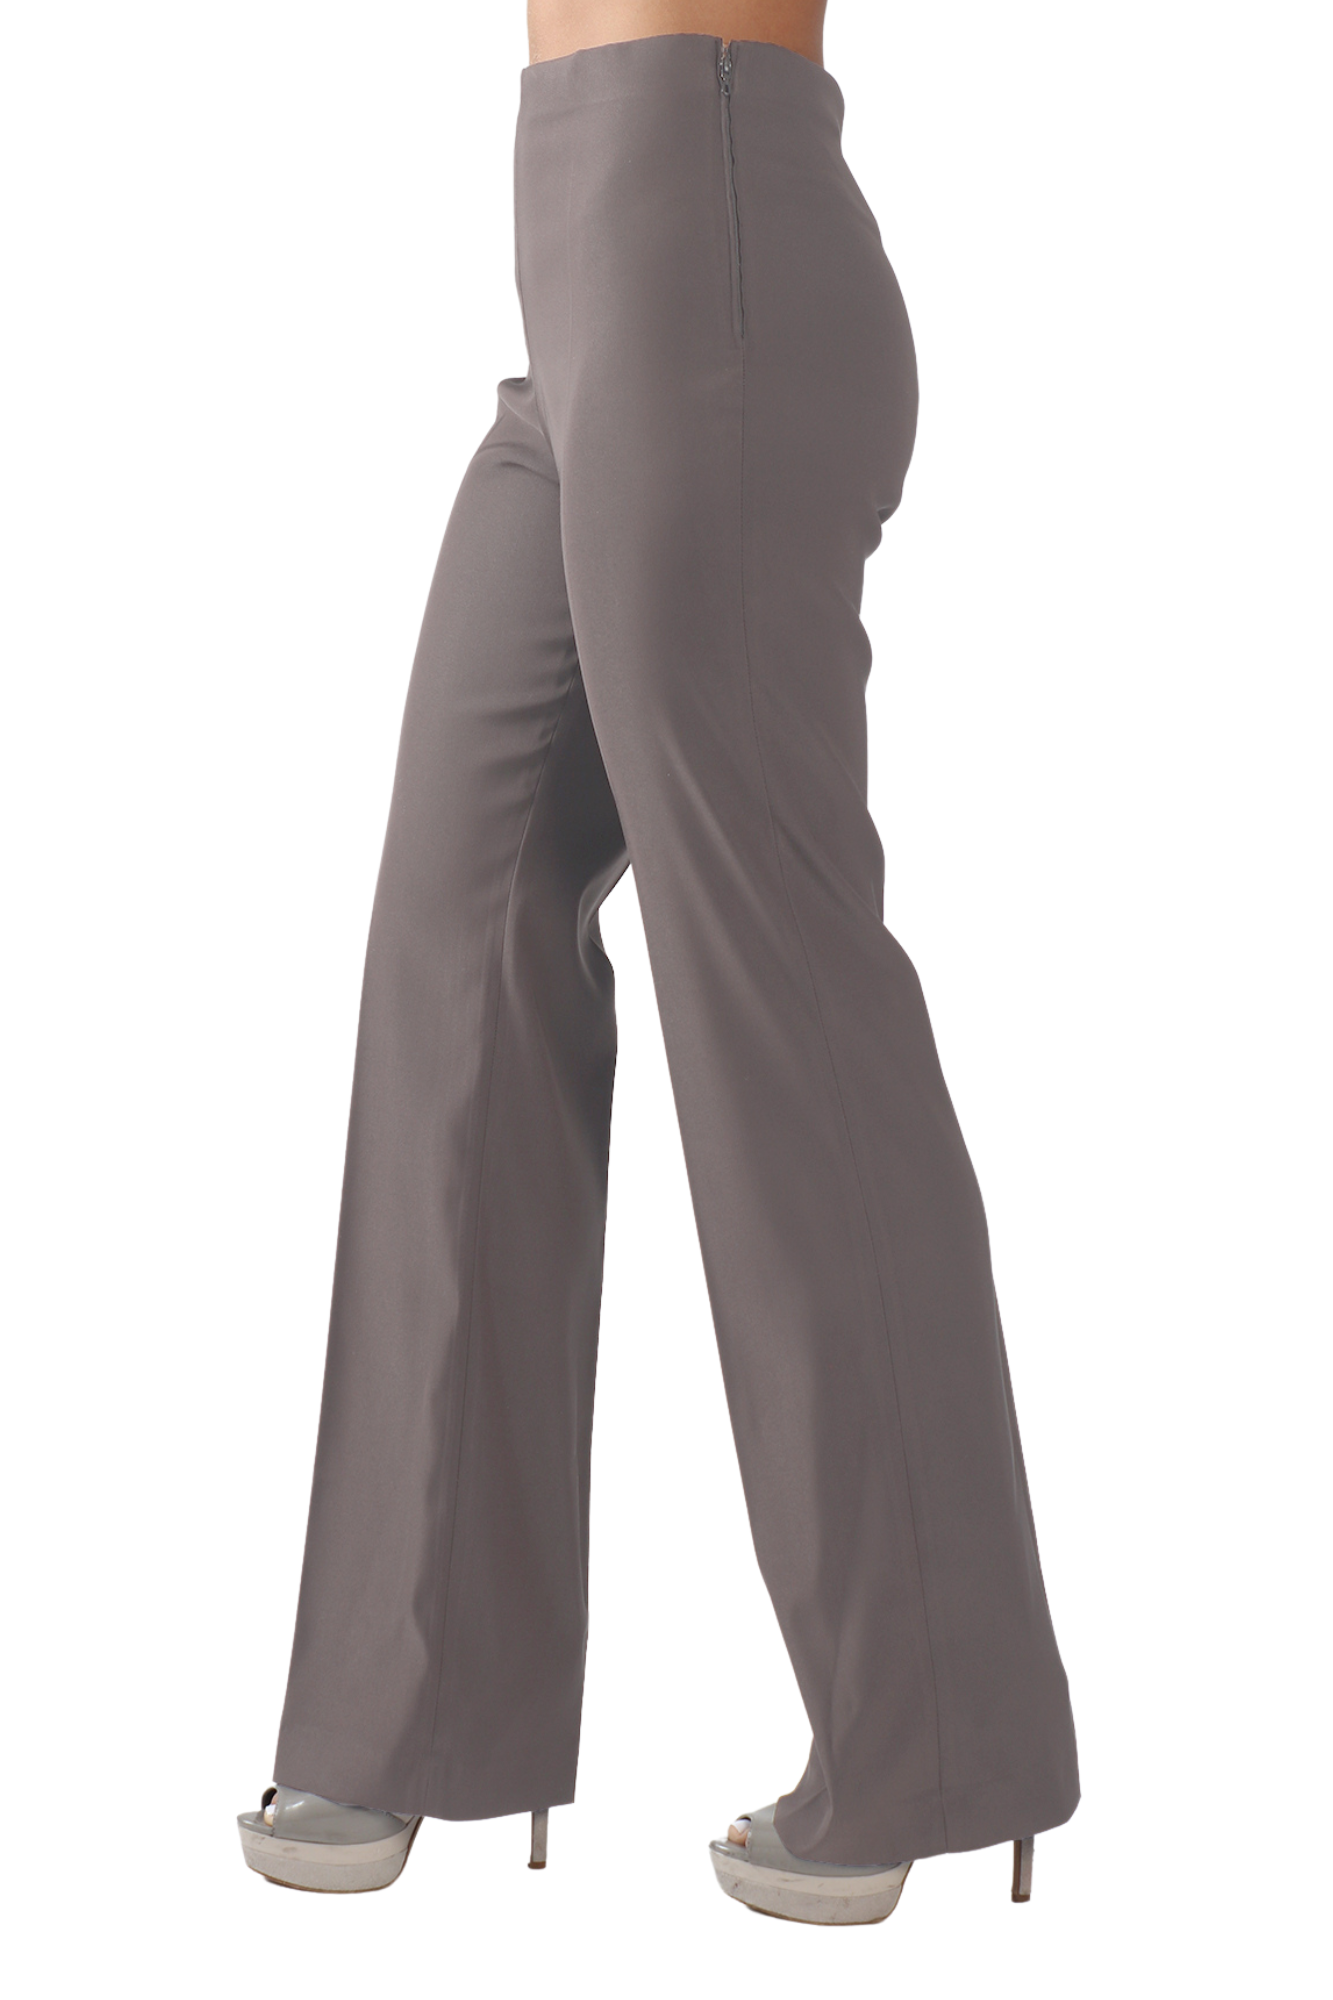 Women's Bootcut Pant Made in France Lior